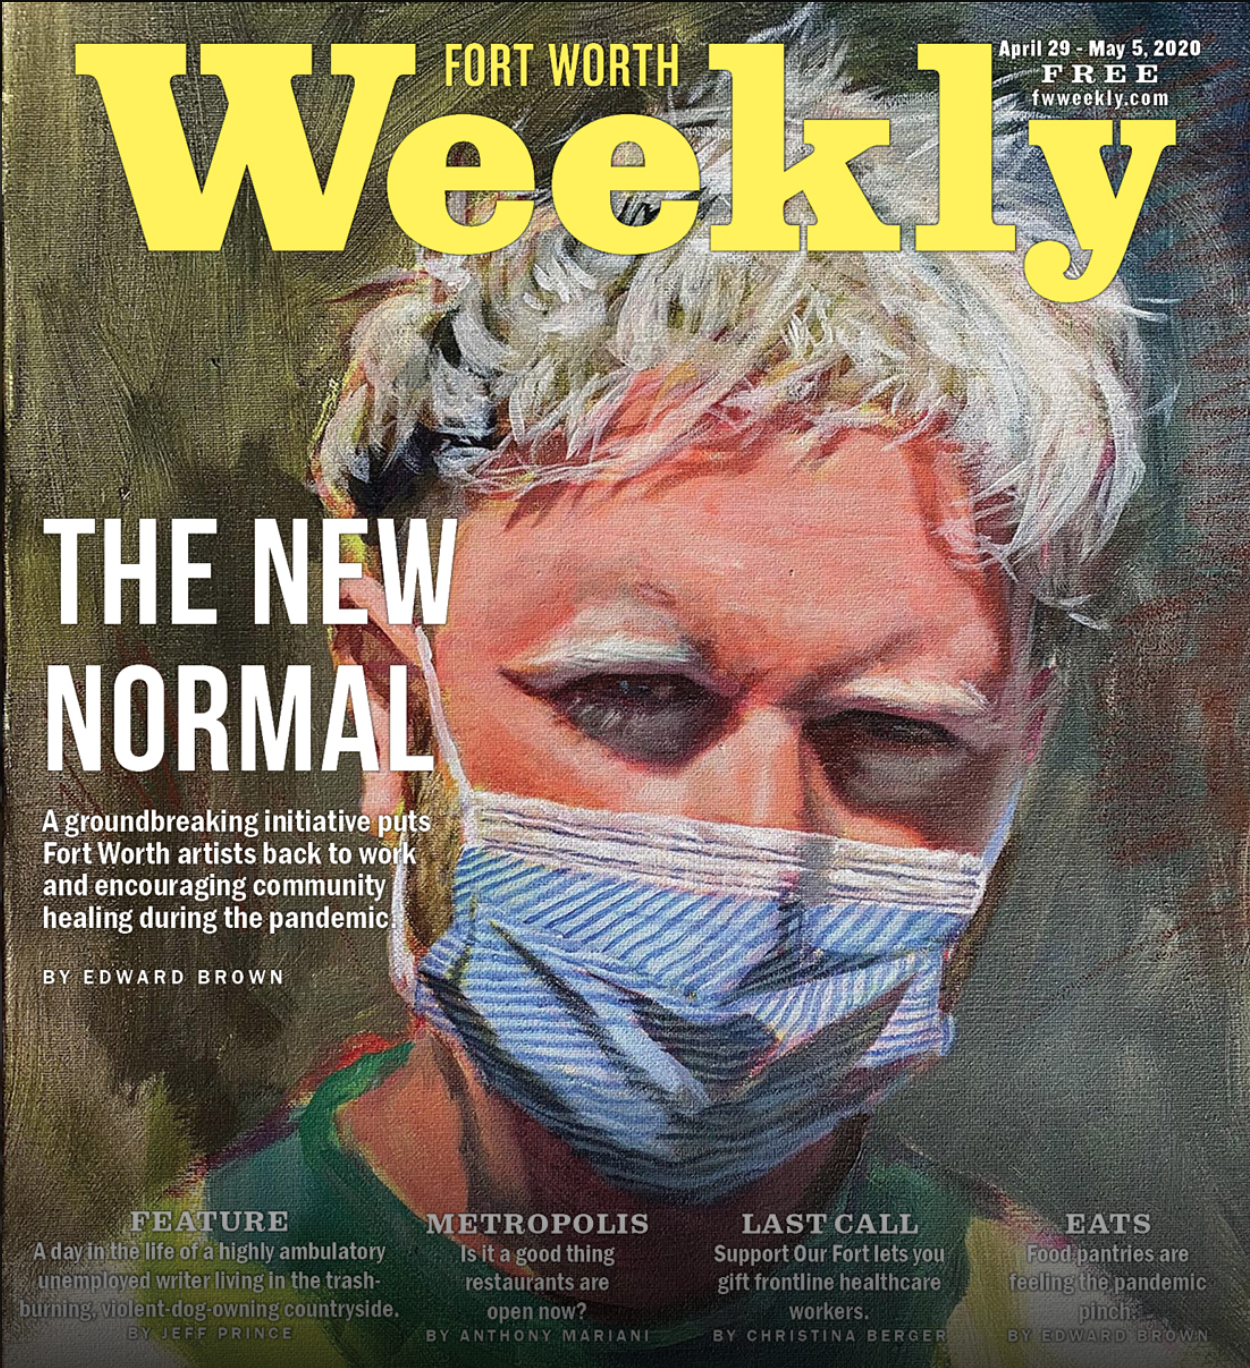 A new grant-based initiative is paying local artists to respond to COVID-19 with new works, Cover Story, Fort Worth Weekly, April 2020